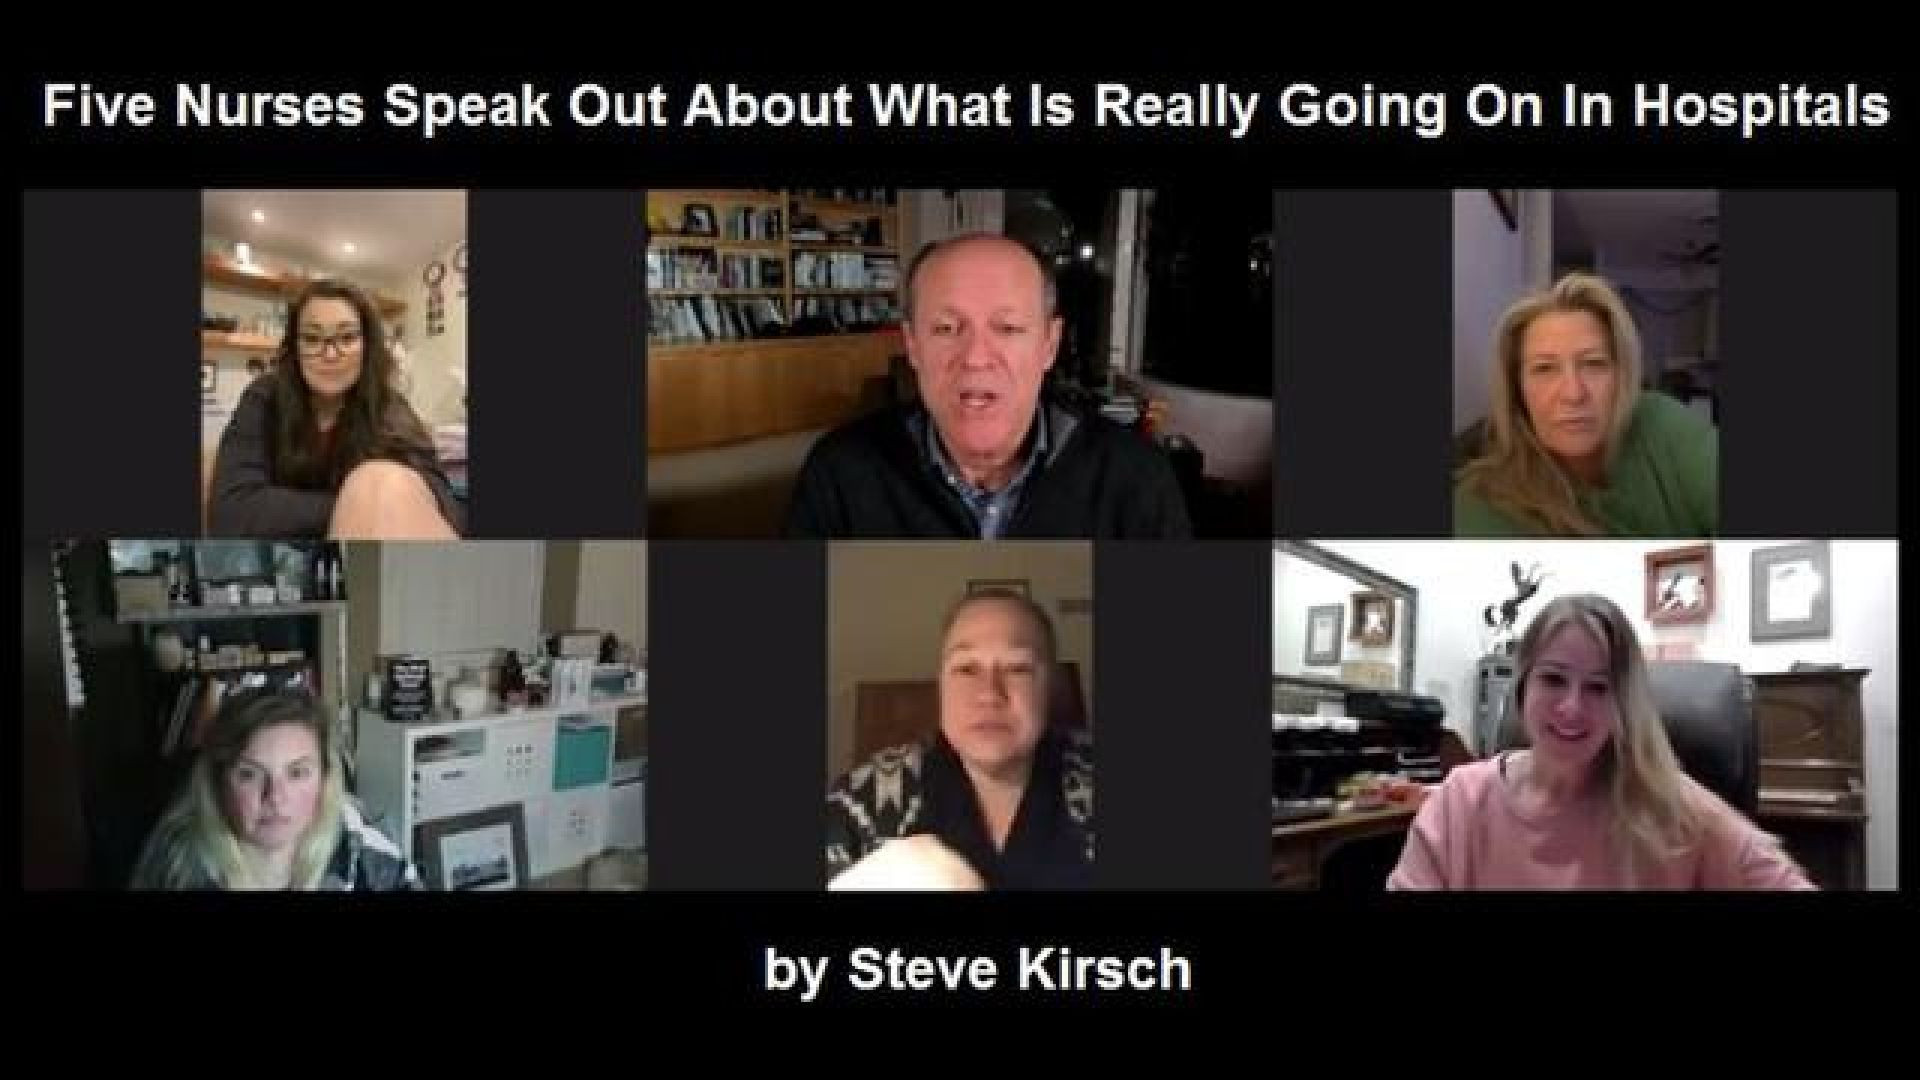 FIVE NURSES SPEAK OUT ABOUT WHAT IS REALLY GOING ON IN HOSPITALS BY STEVE KIRSCH